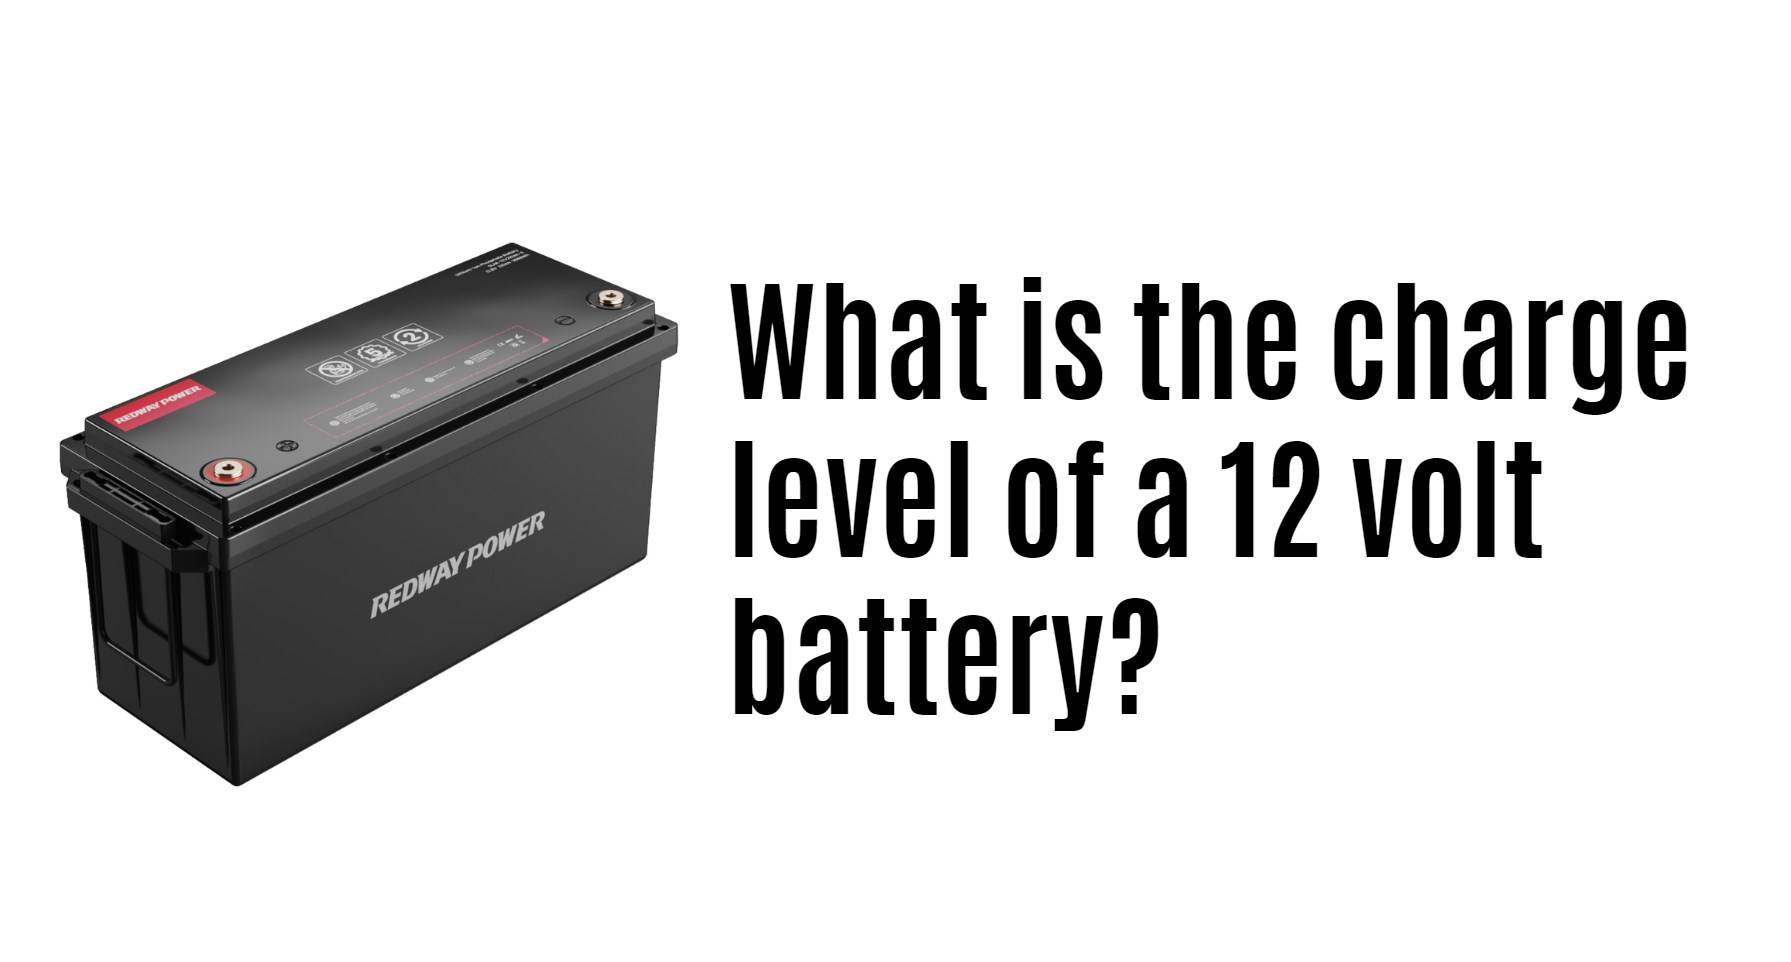 What is the charge level of a 12 volt battery?